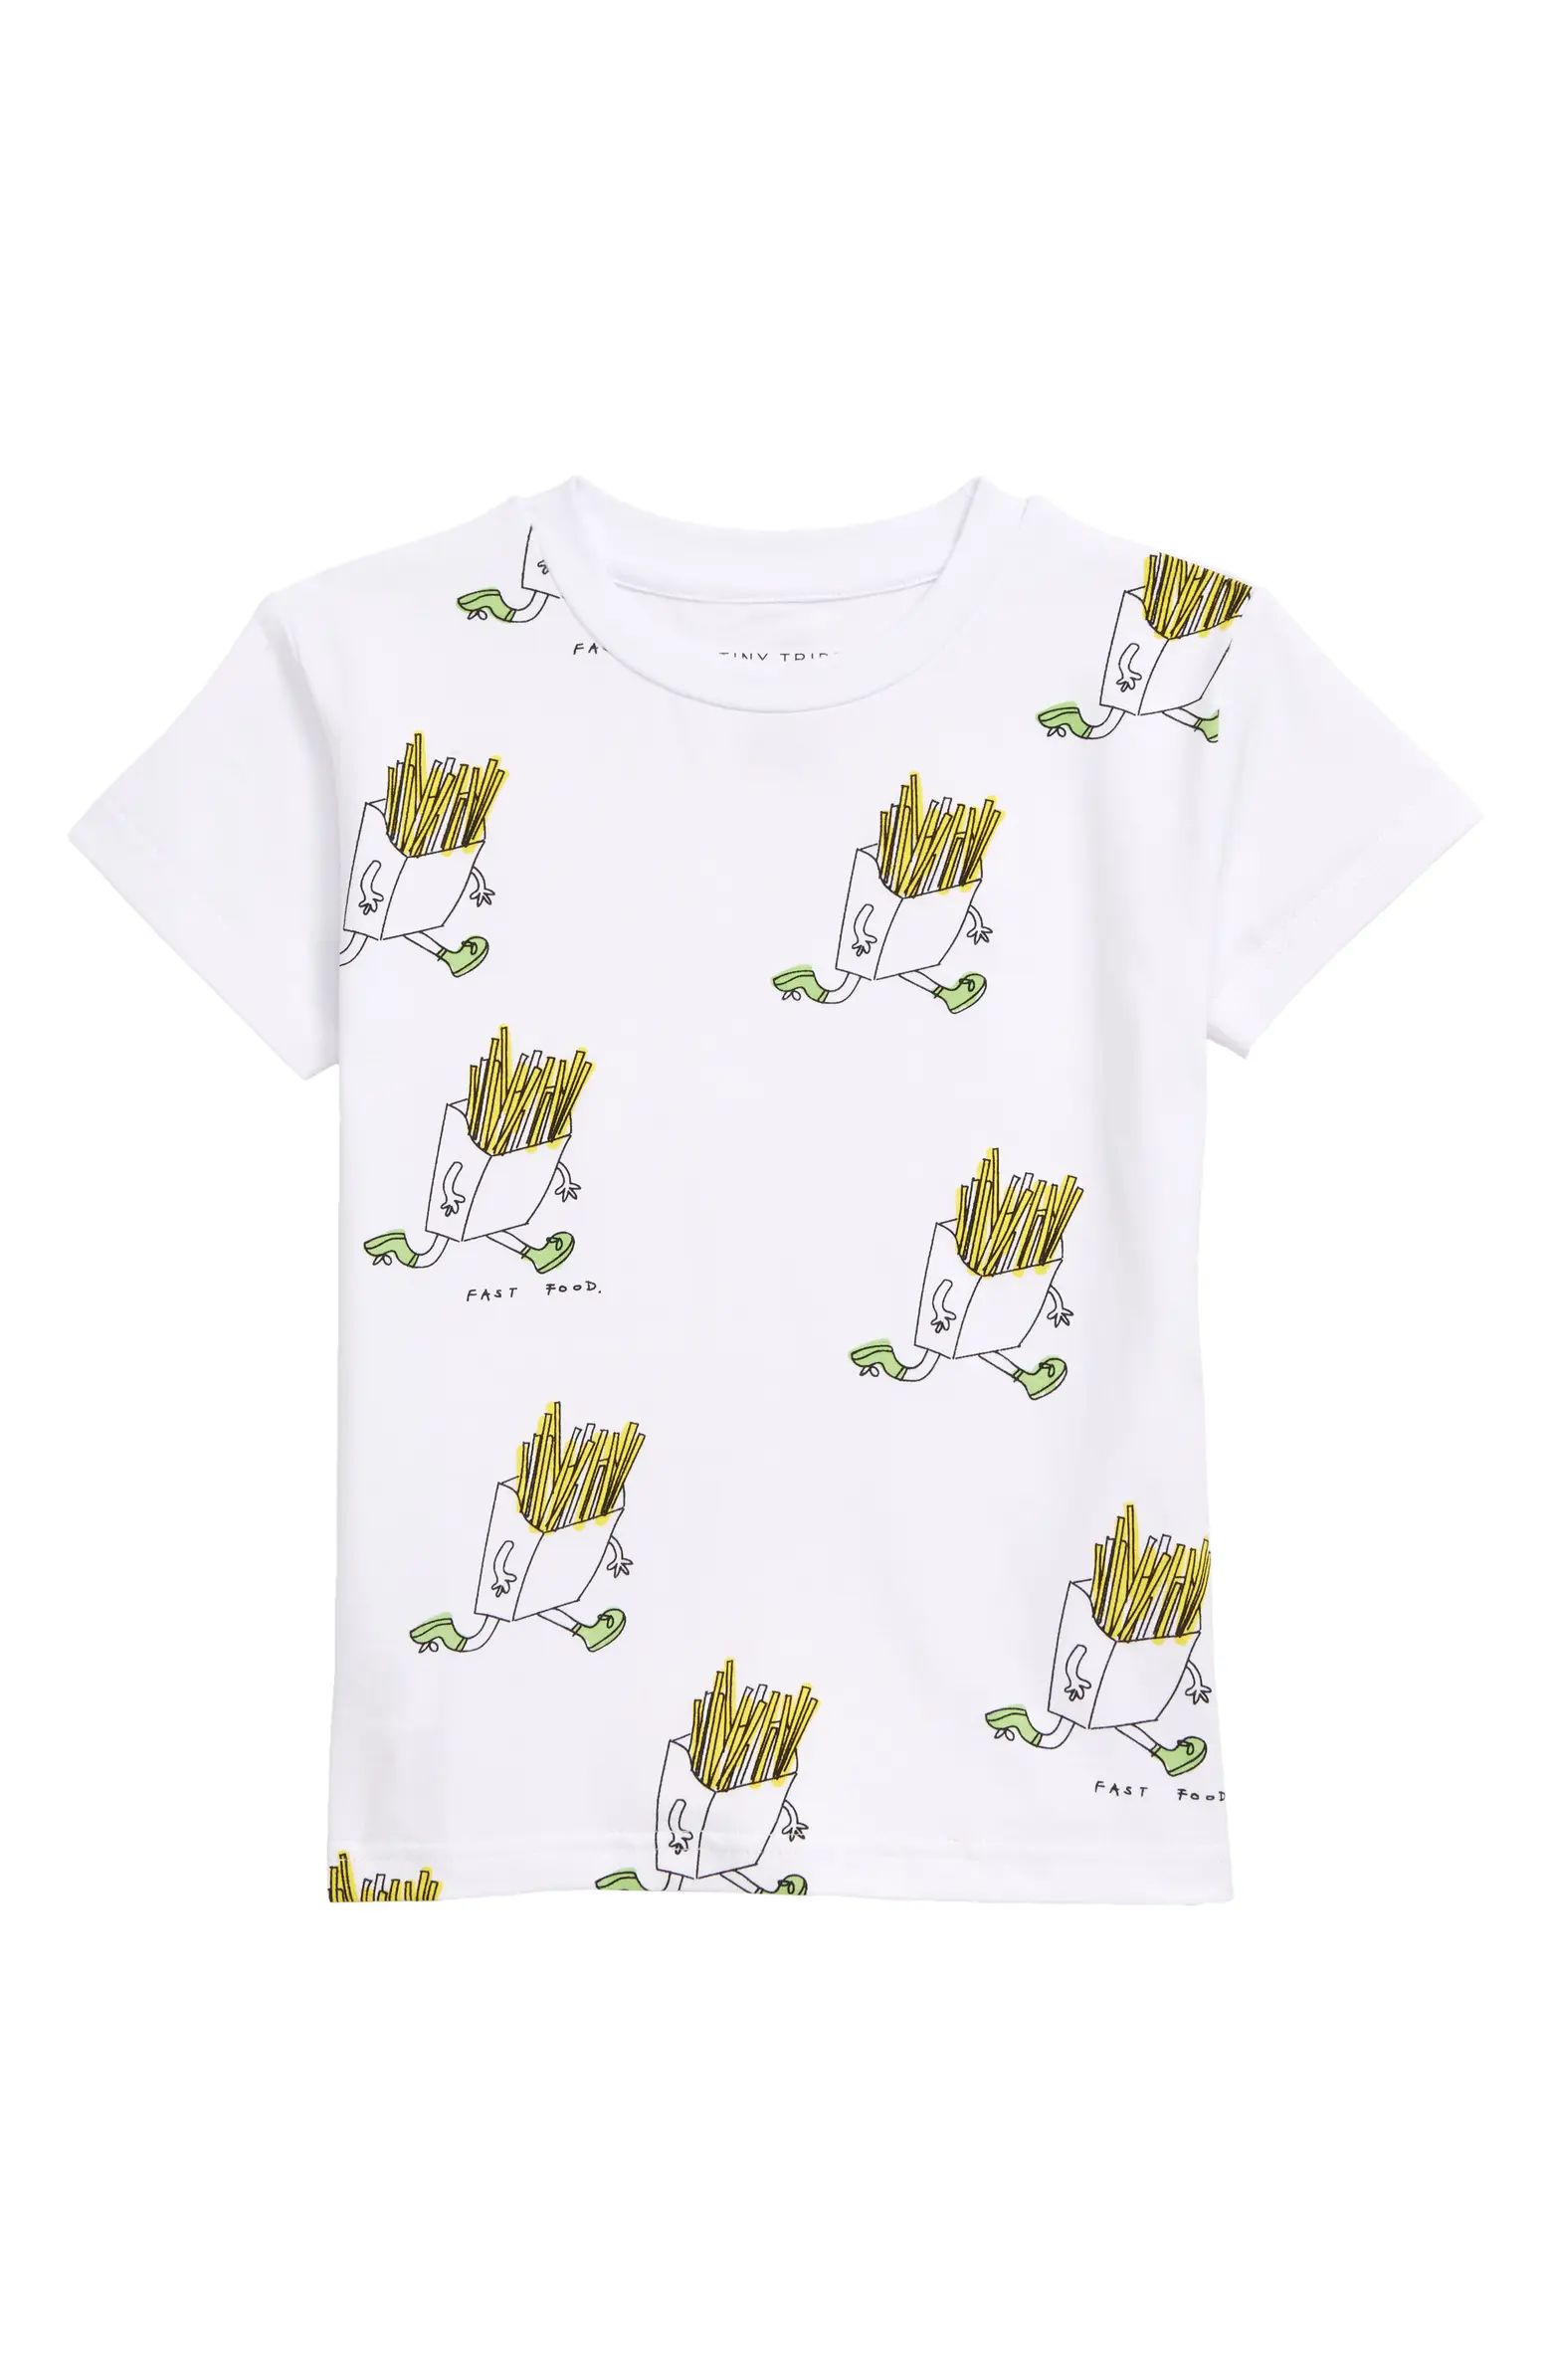 Fast Food Graphic Tee | Nordstrom